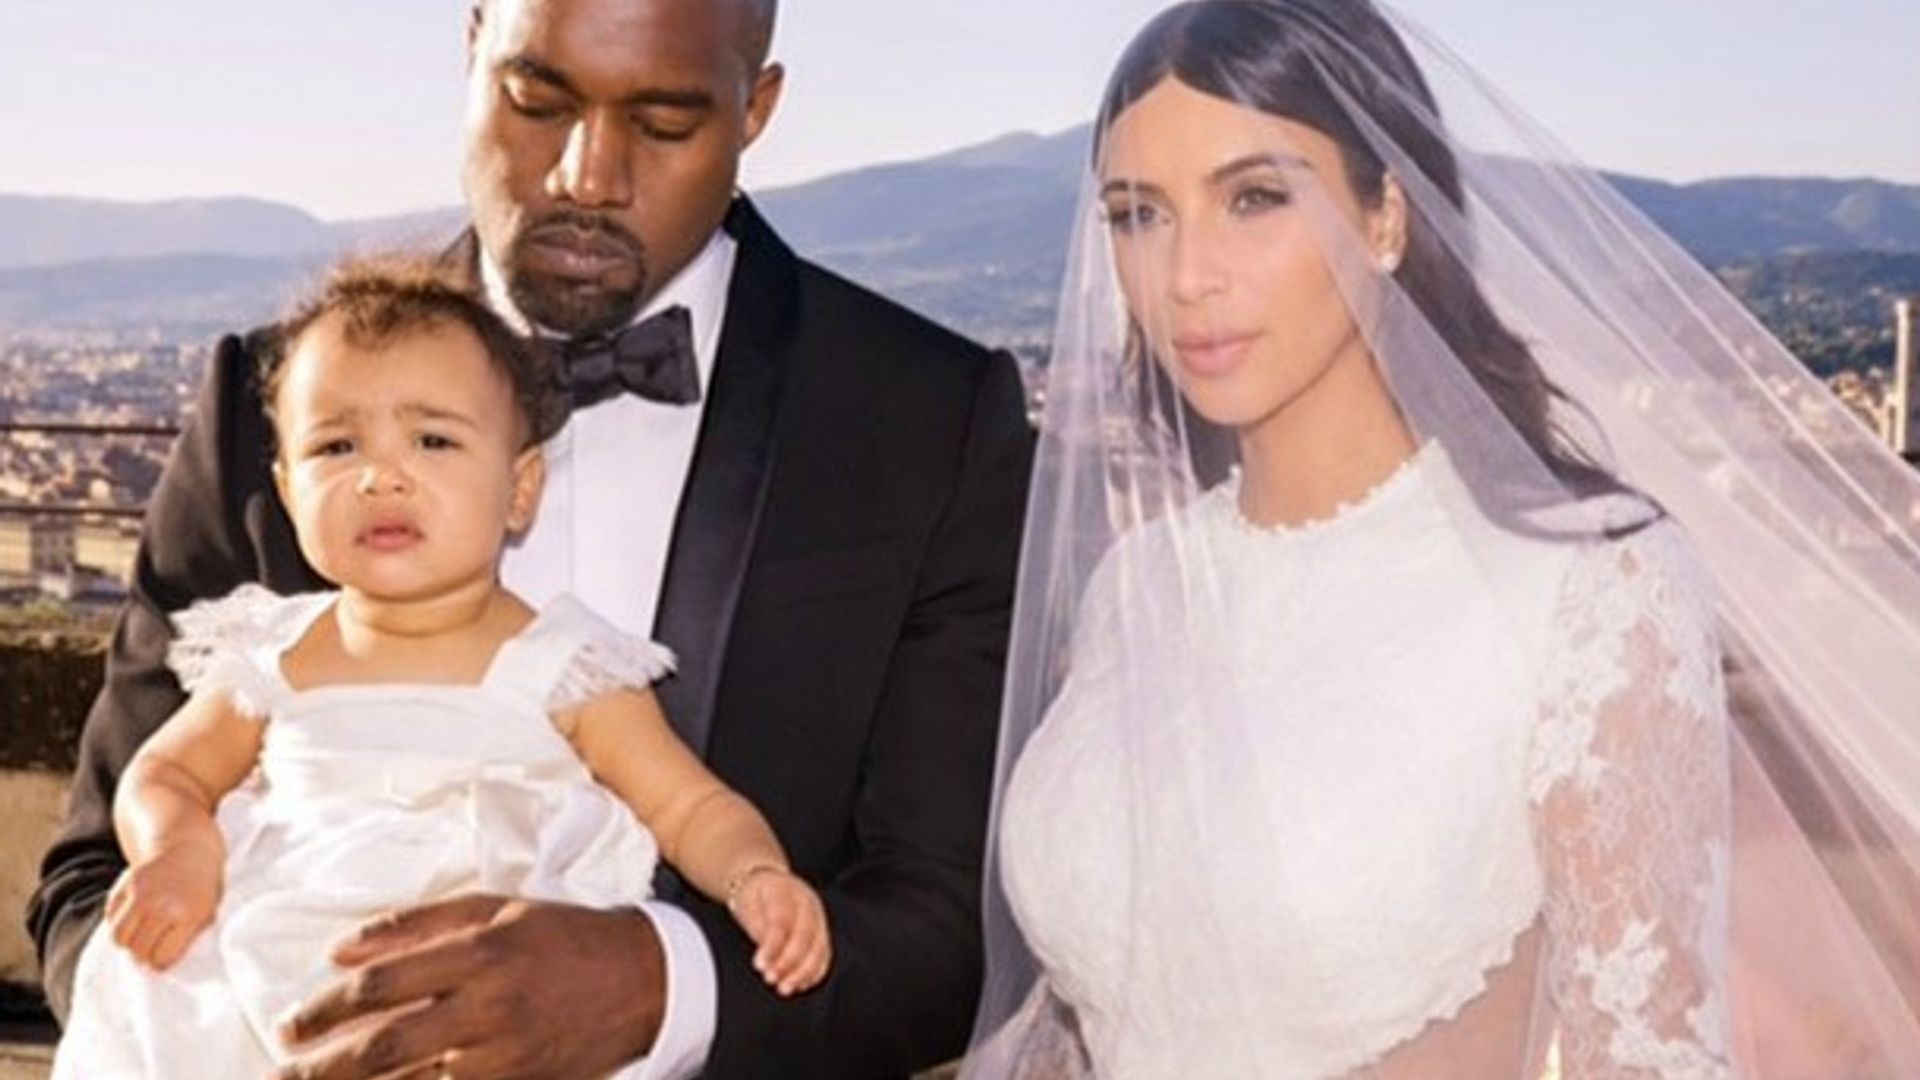 kim kardashian in her wedding dress next to kanye who is holding their baby daughter north west